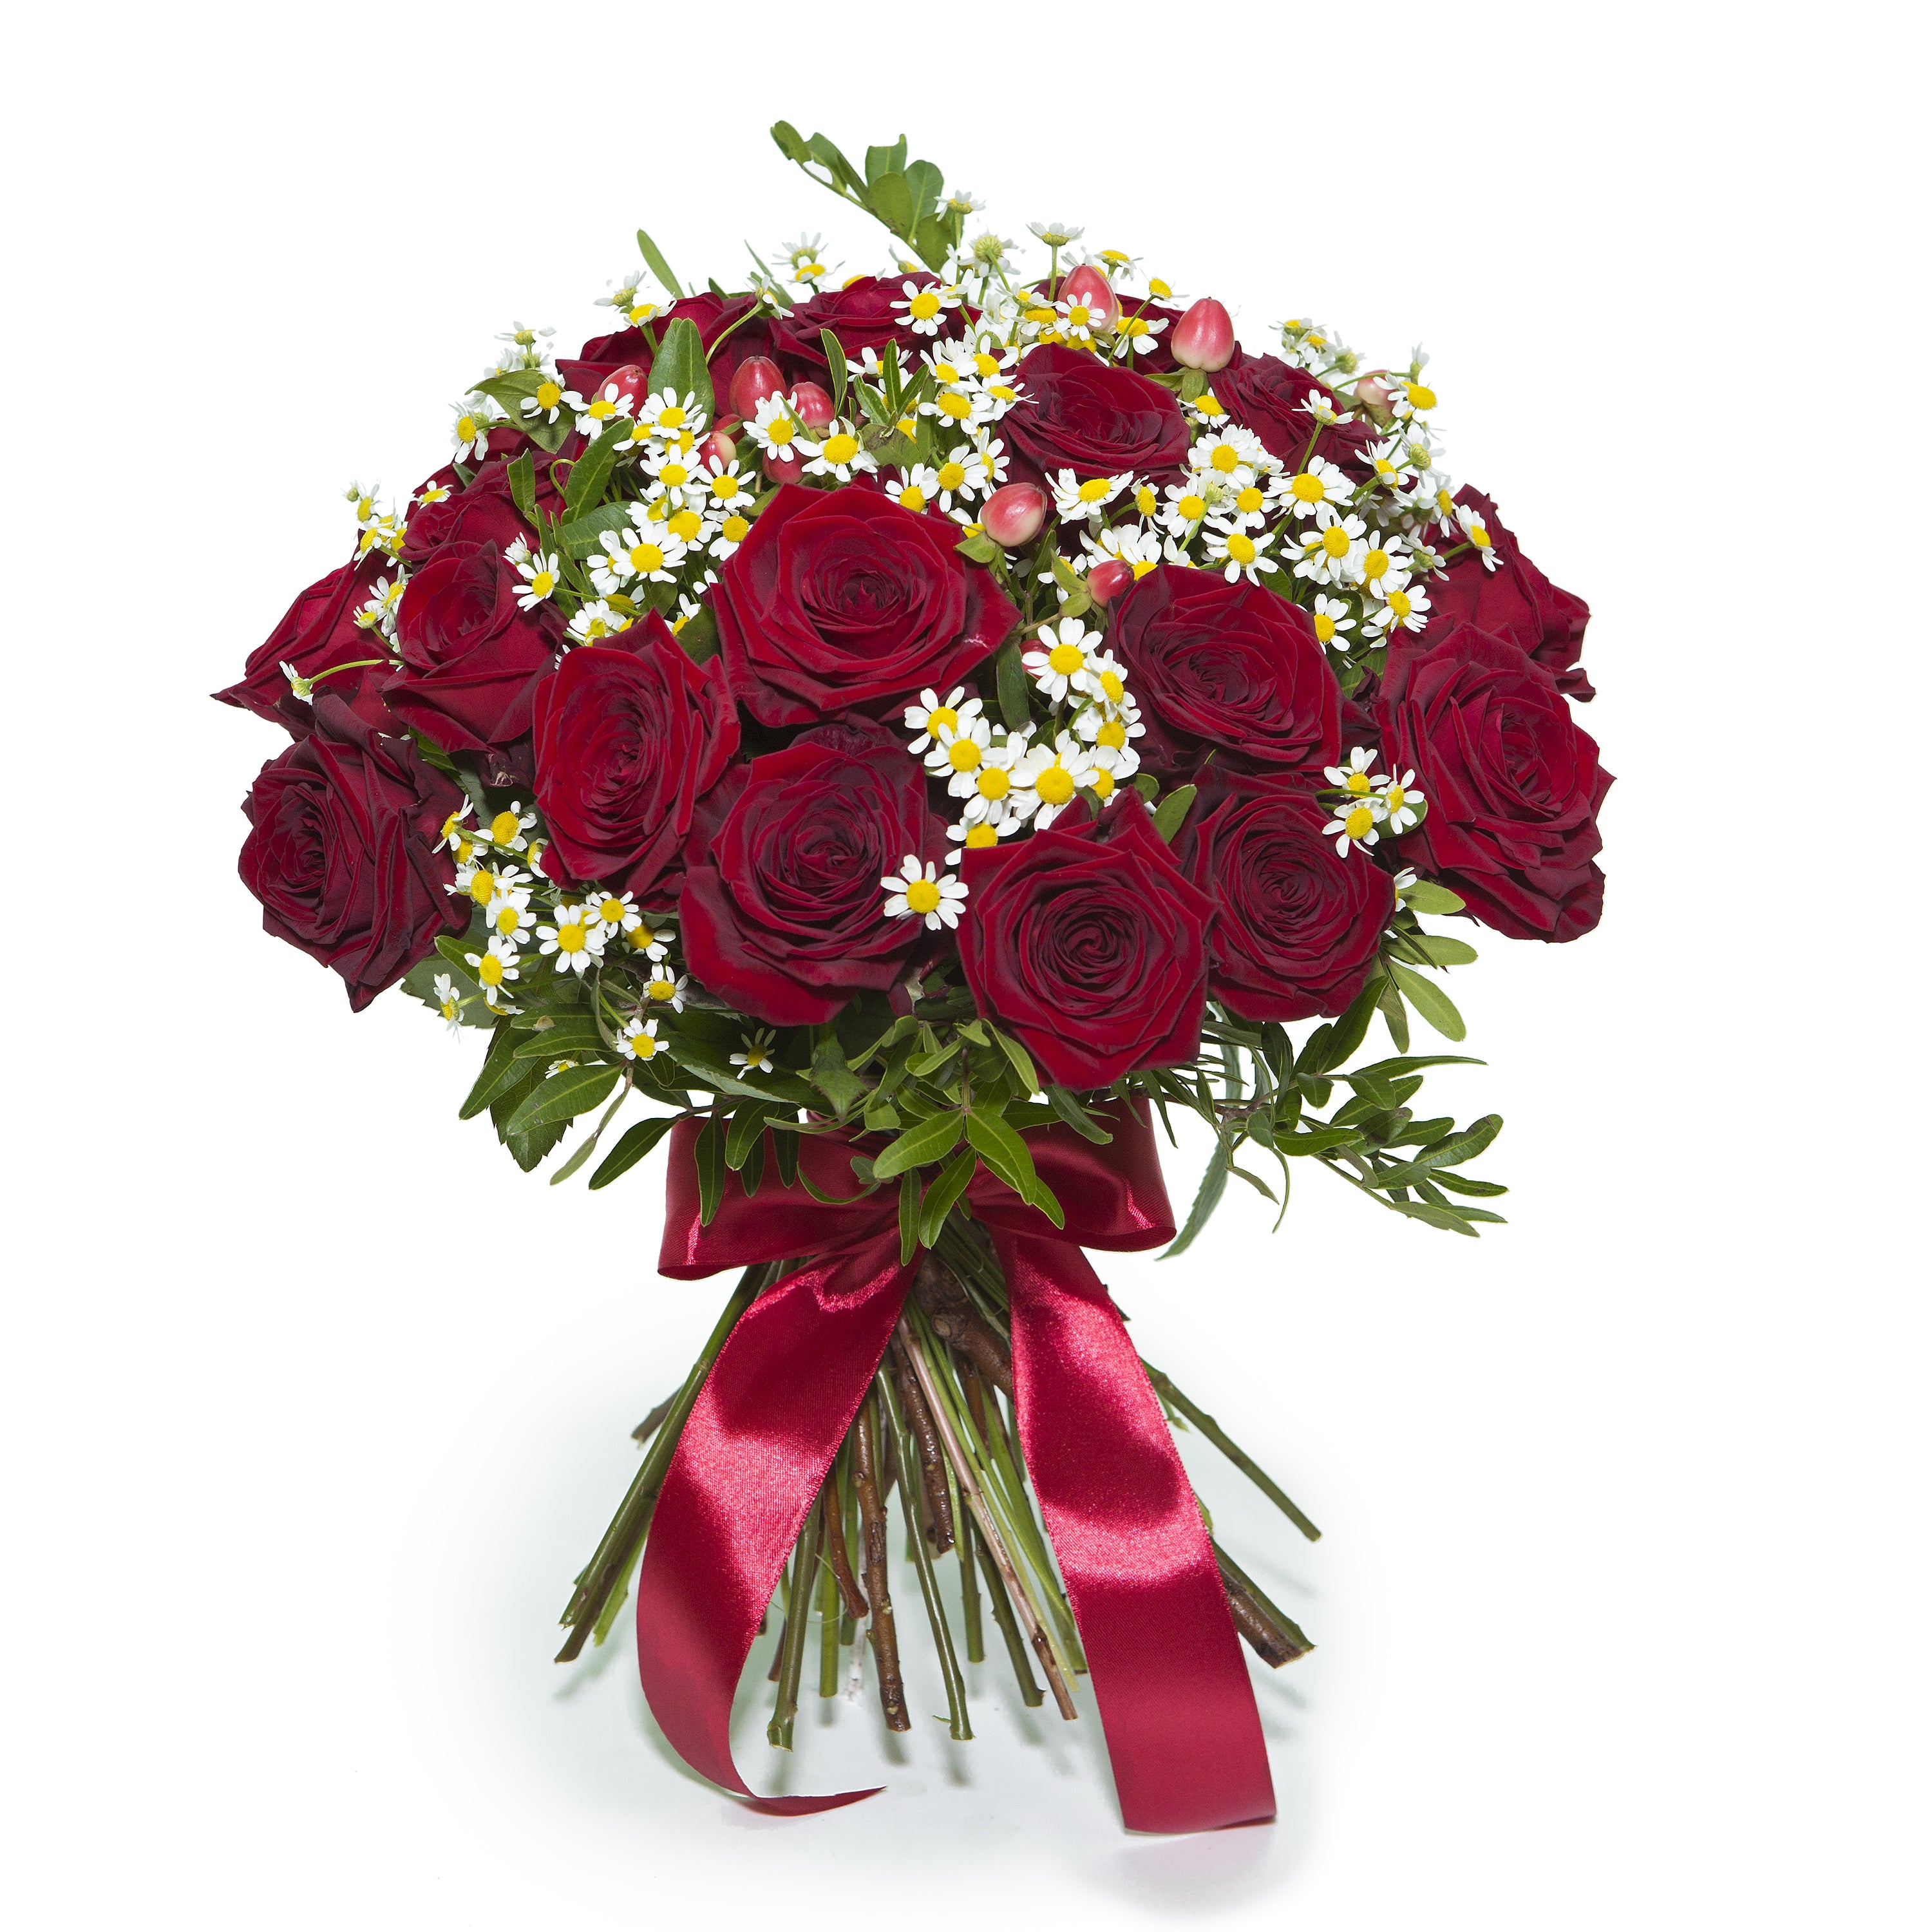 Daisy, Lily, and Rose Bouquet [With Free Delivery]